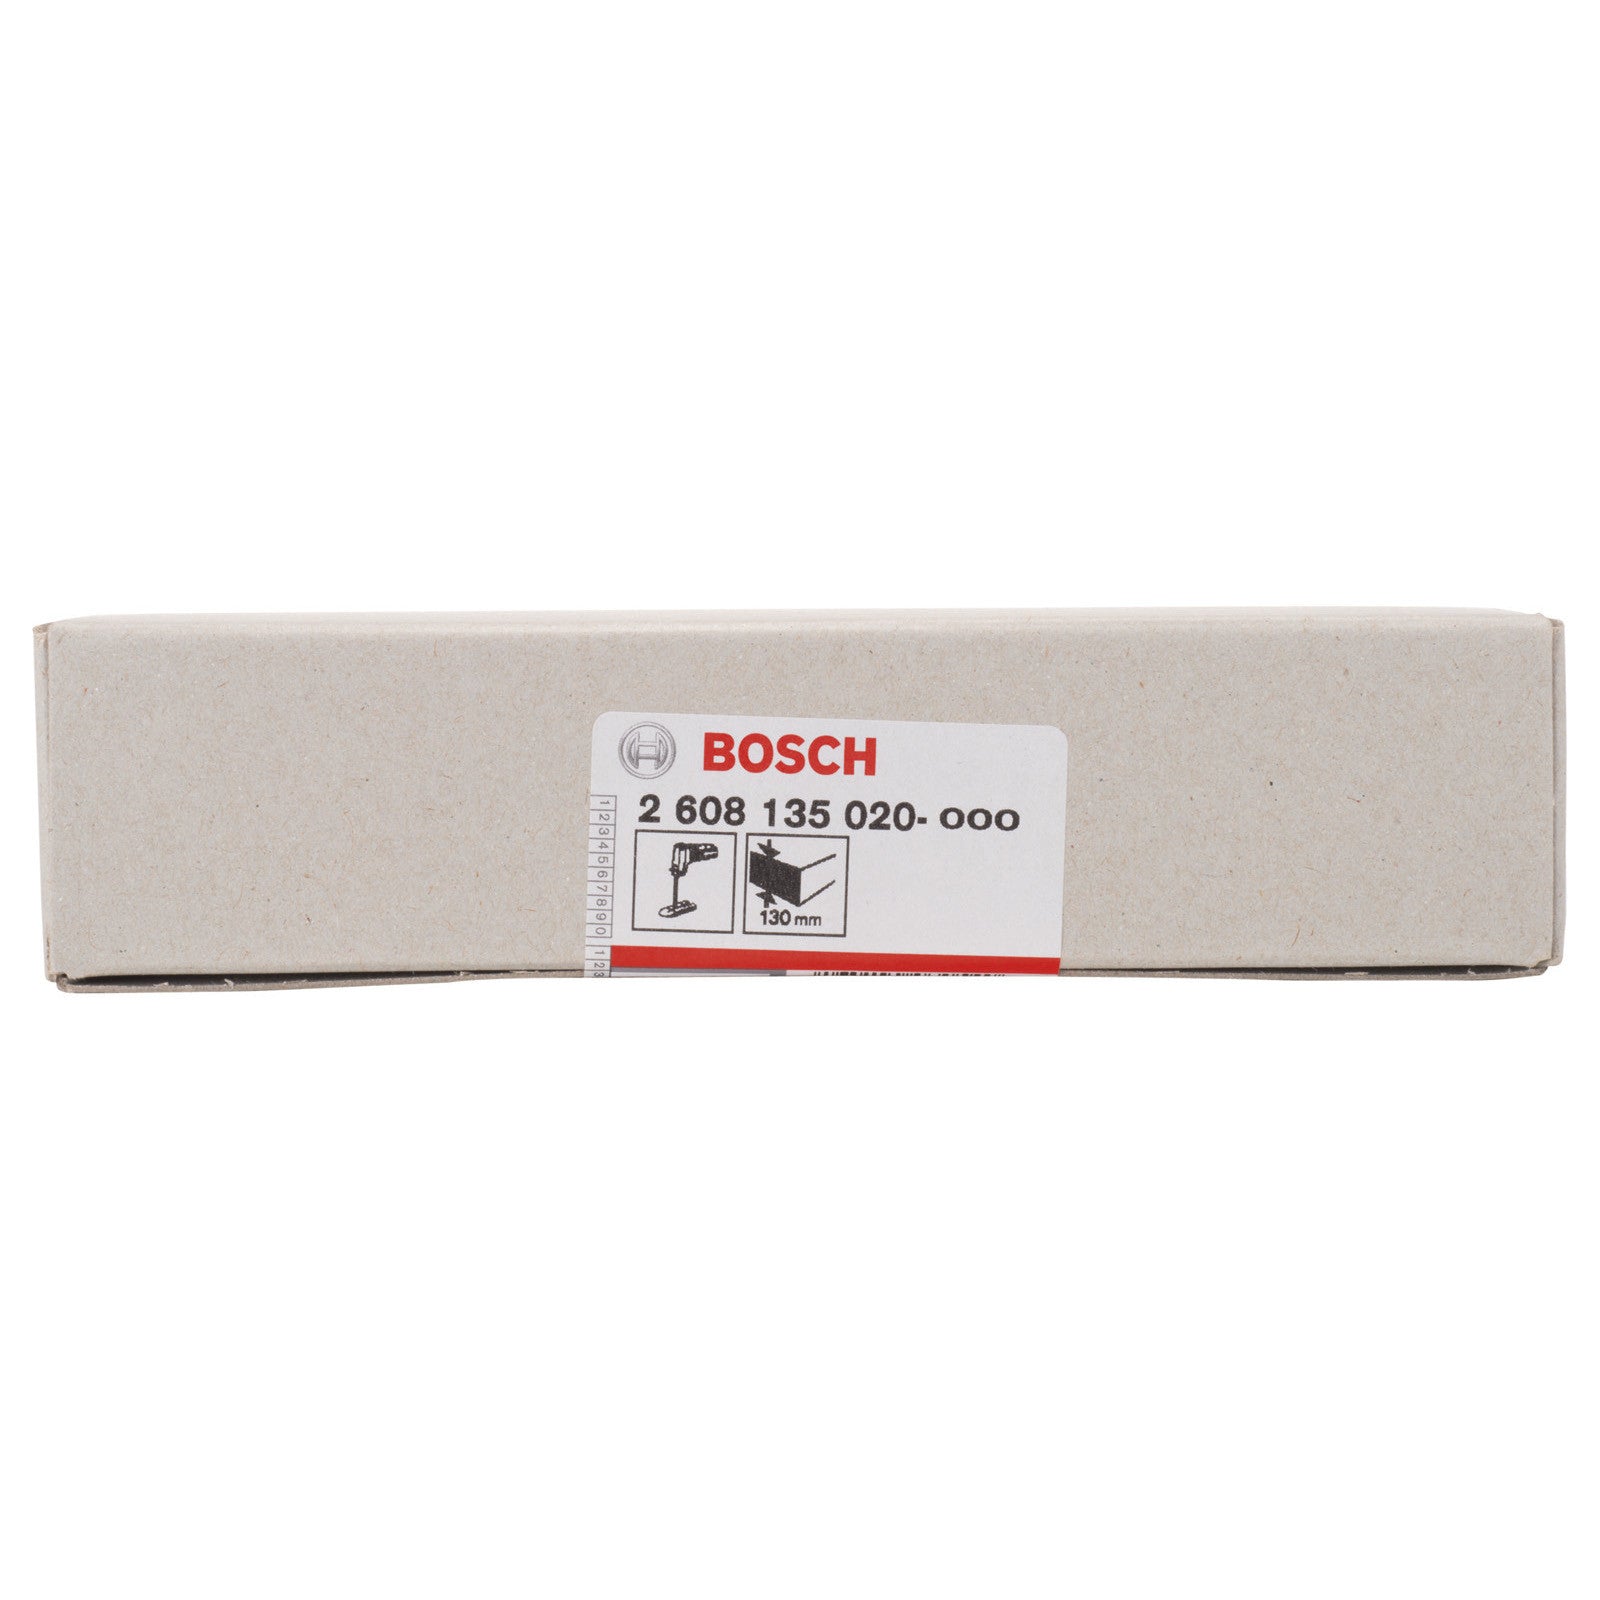 Bosch GSG blade guide 130 mm, line edge sawing 2608135020 Power Tool Services